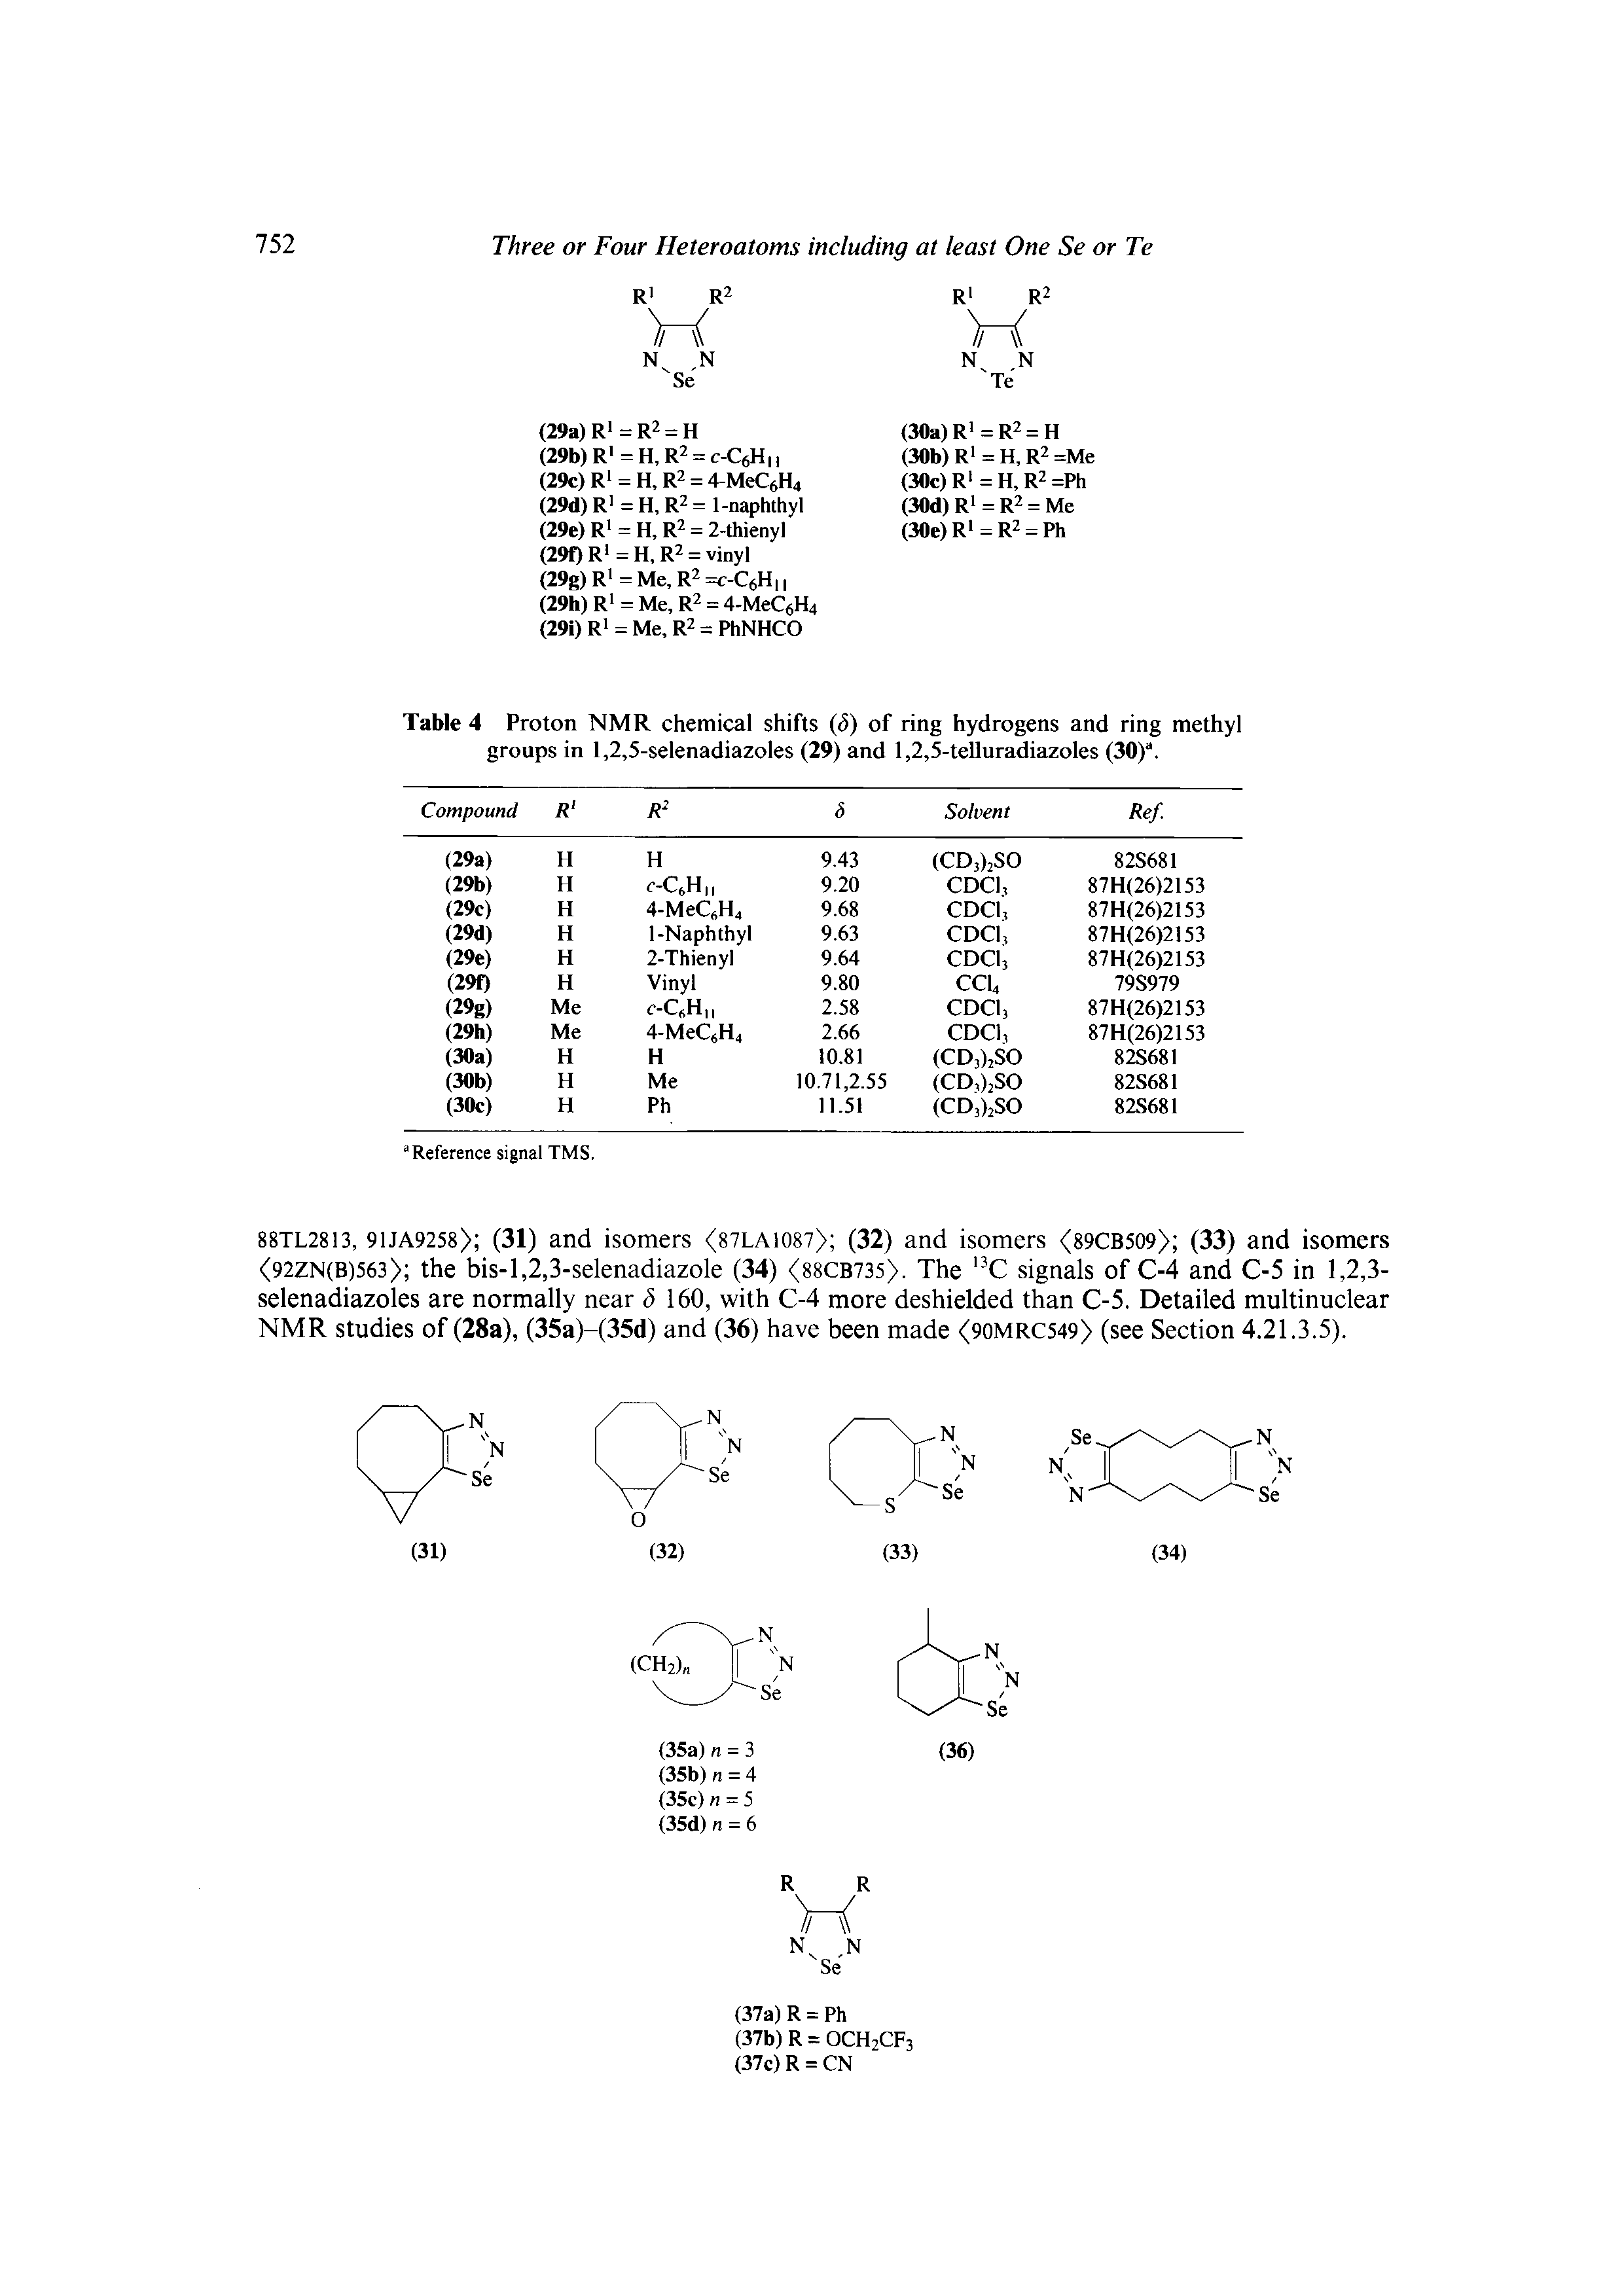 Table 4 Proton NMR chemical shifts ( ) of ring hydrogens and ring methyl groups in 1,2,5-selenadiazoles (29) and 1,2,5-telluradiazoles (30) .